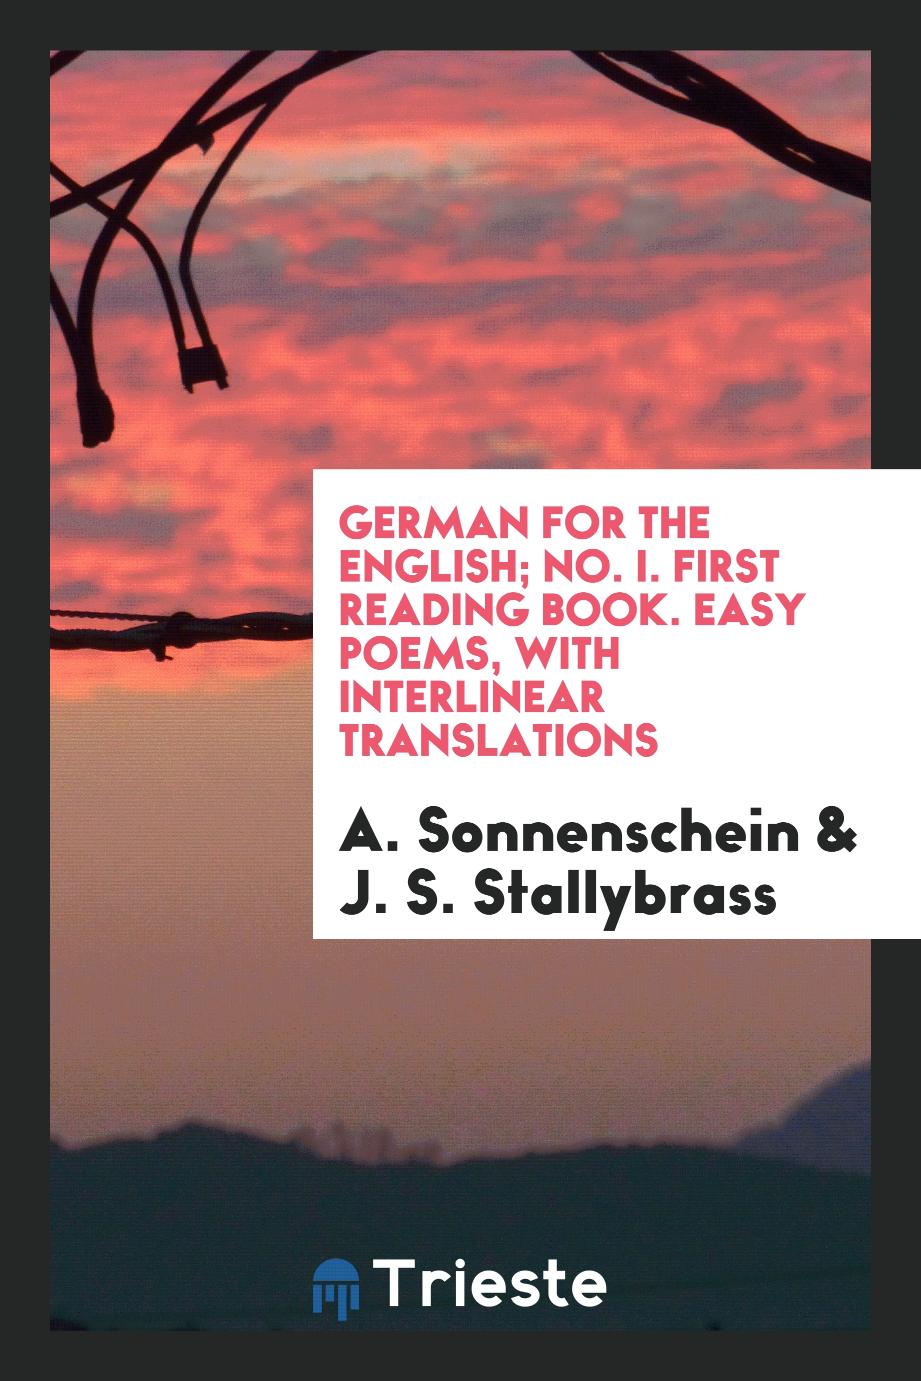 German for the English; No. I. First Reading Book. Easy Poems, with Interlinear Translations